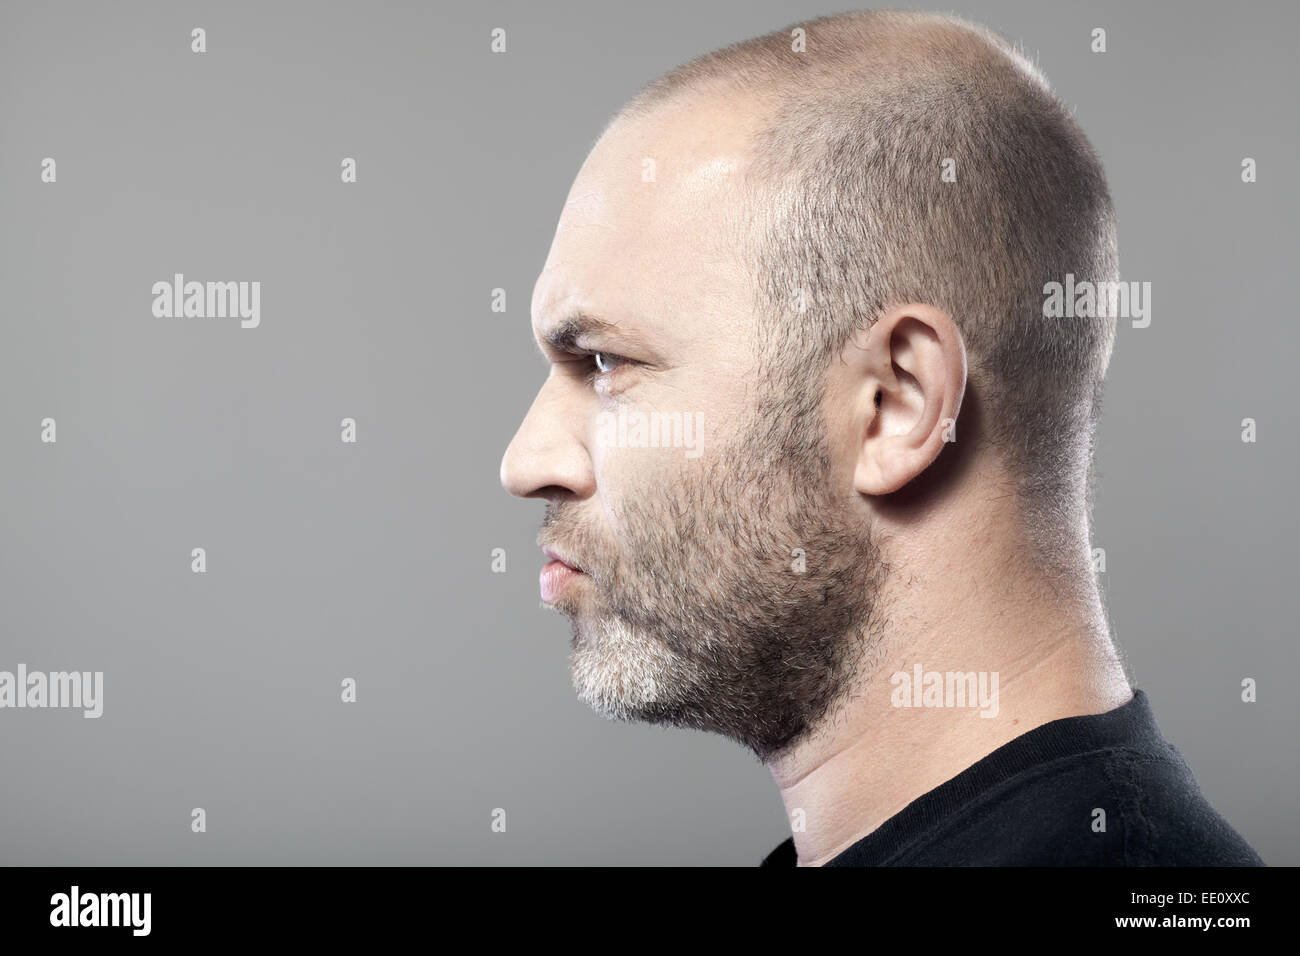 side portrait of gloomy man isolated on gray background with copyspace Stock Photo